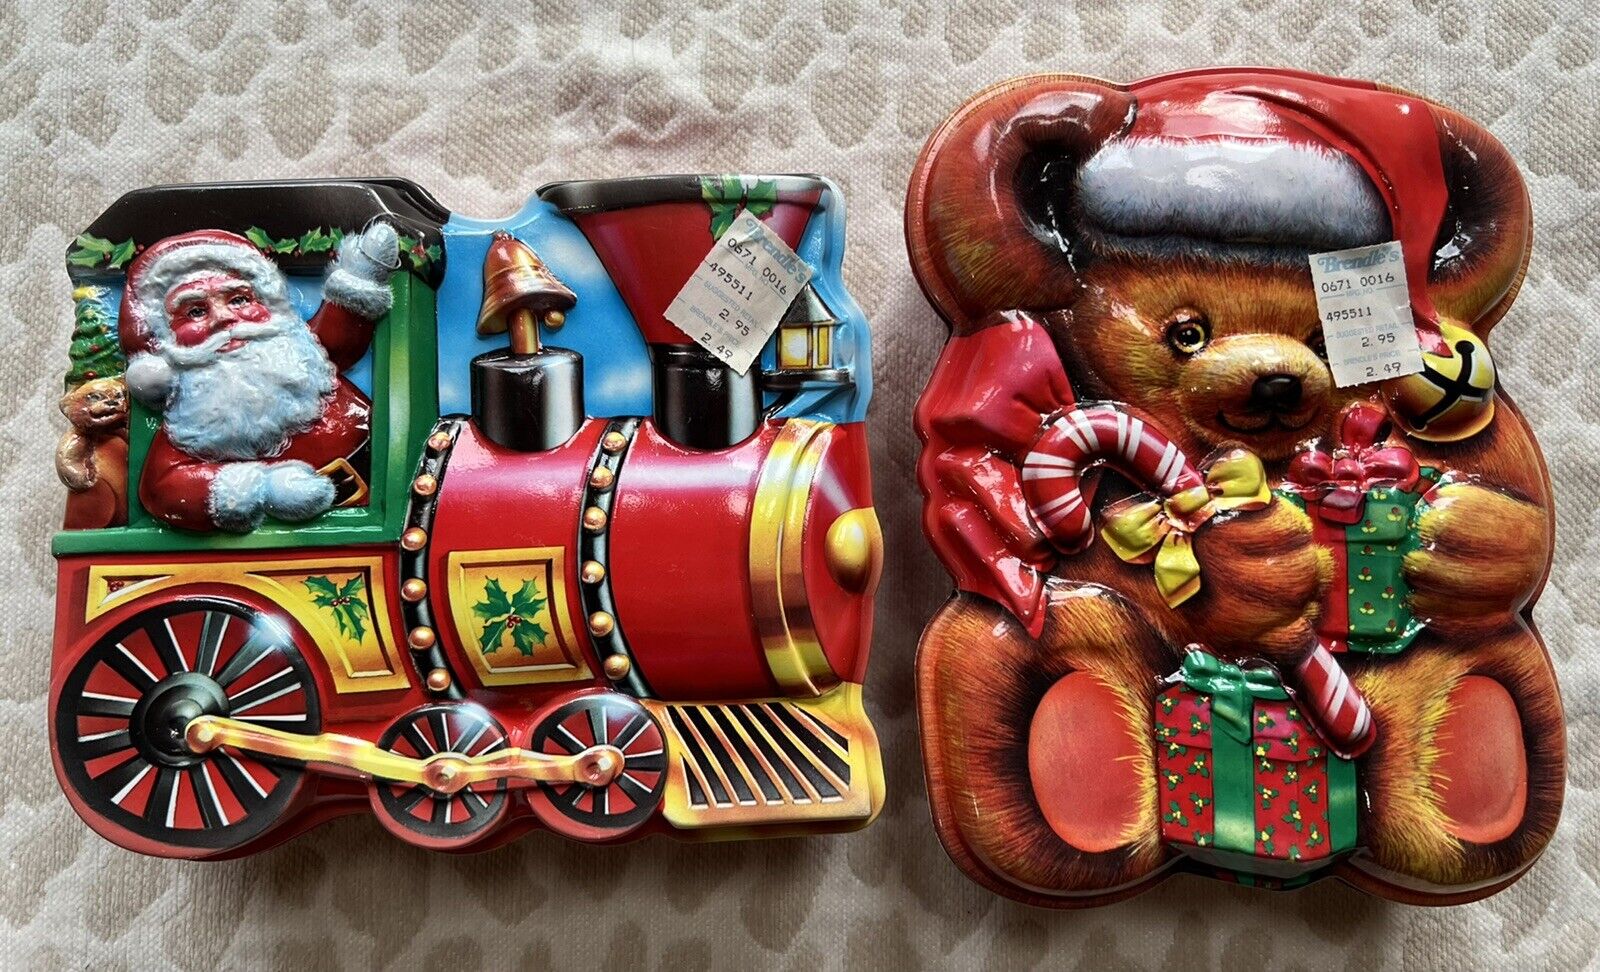 ullman Christmas containers lot of 2 plastic train bear cookie tins vintage NOS